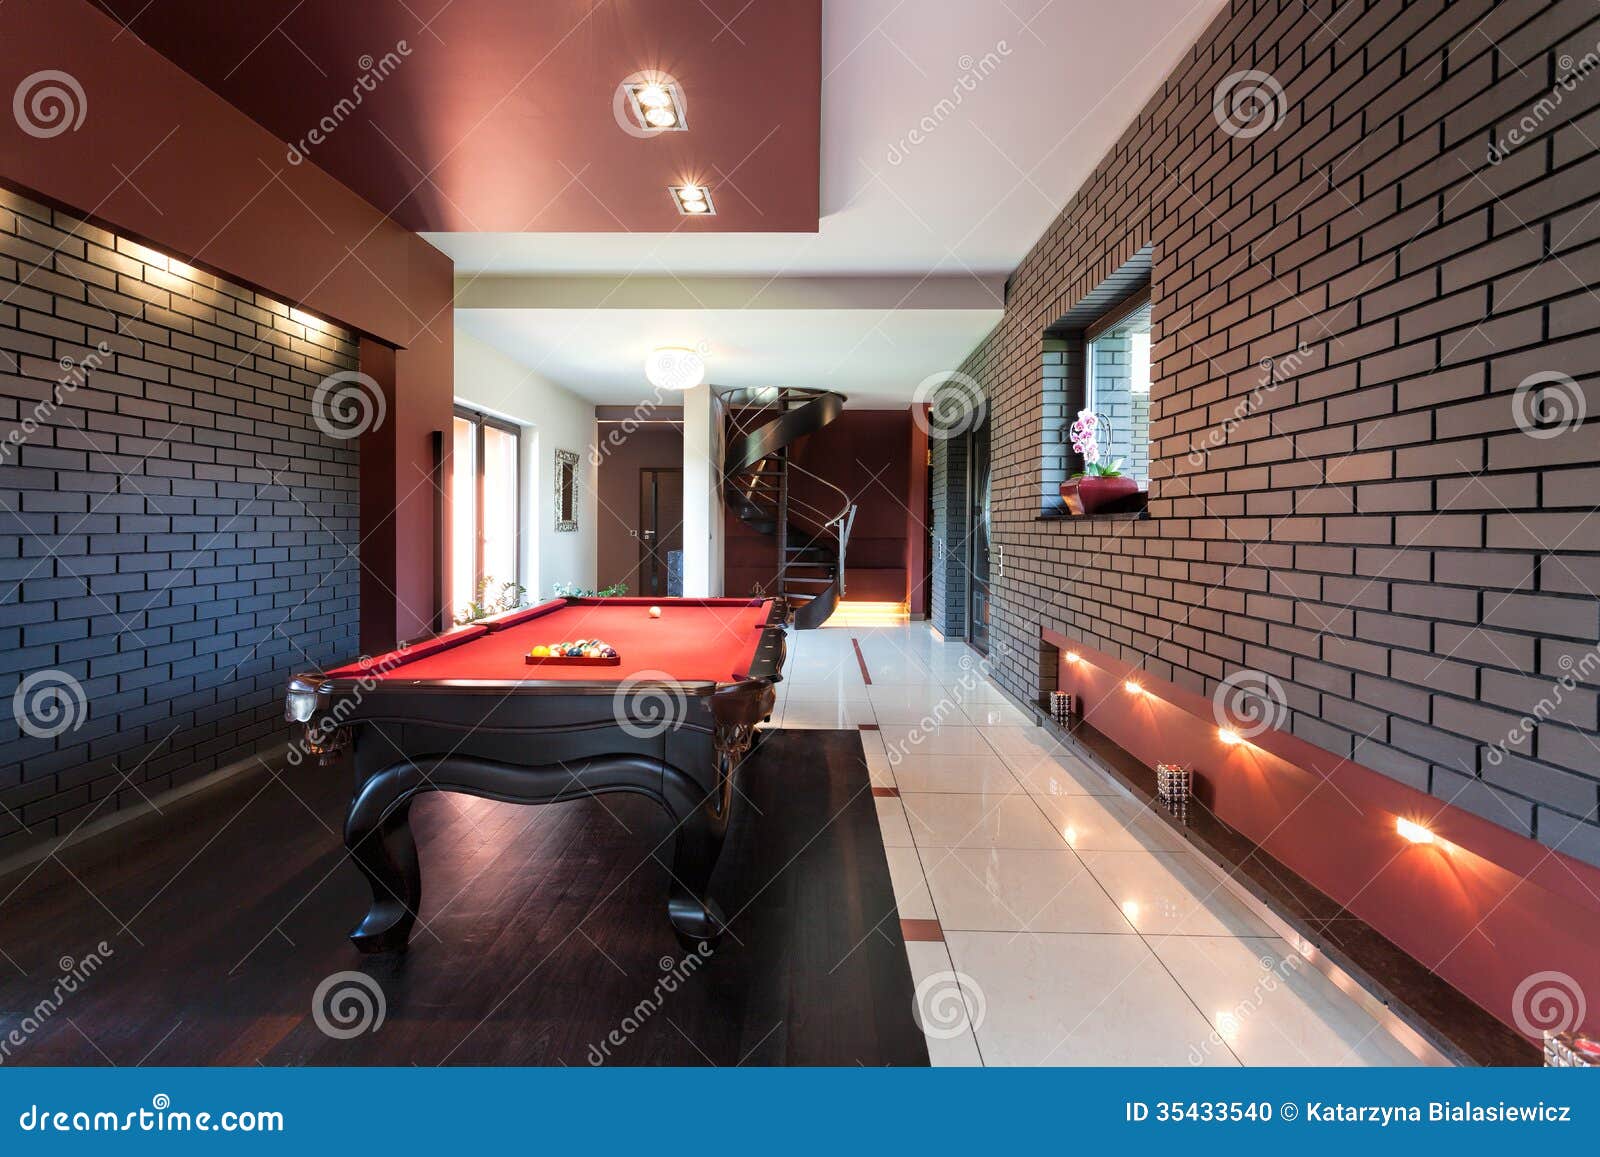 snooker table in luxury interior